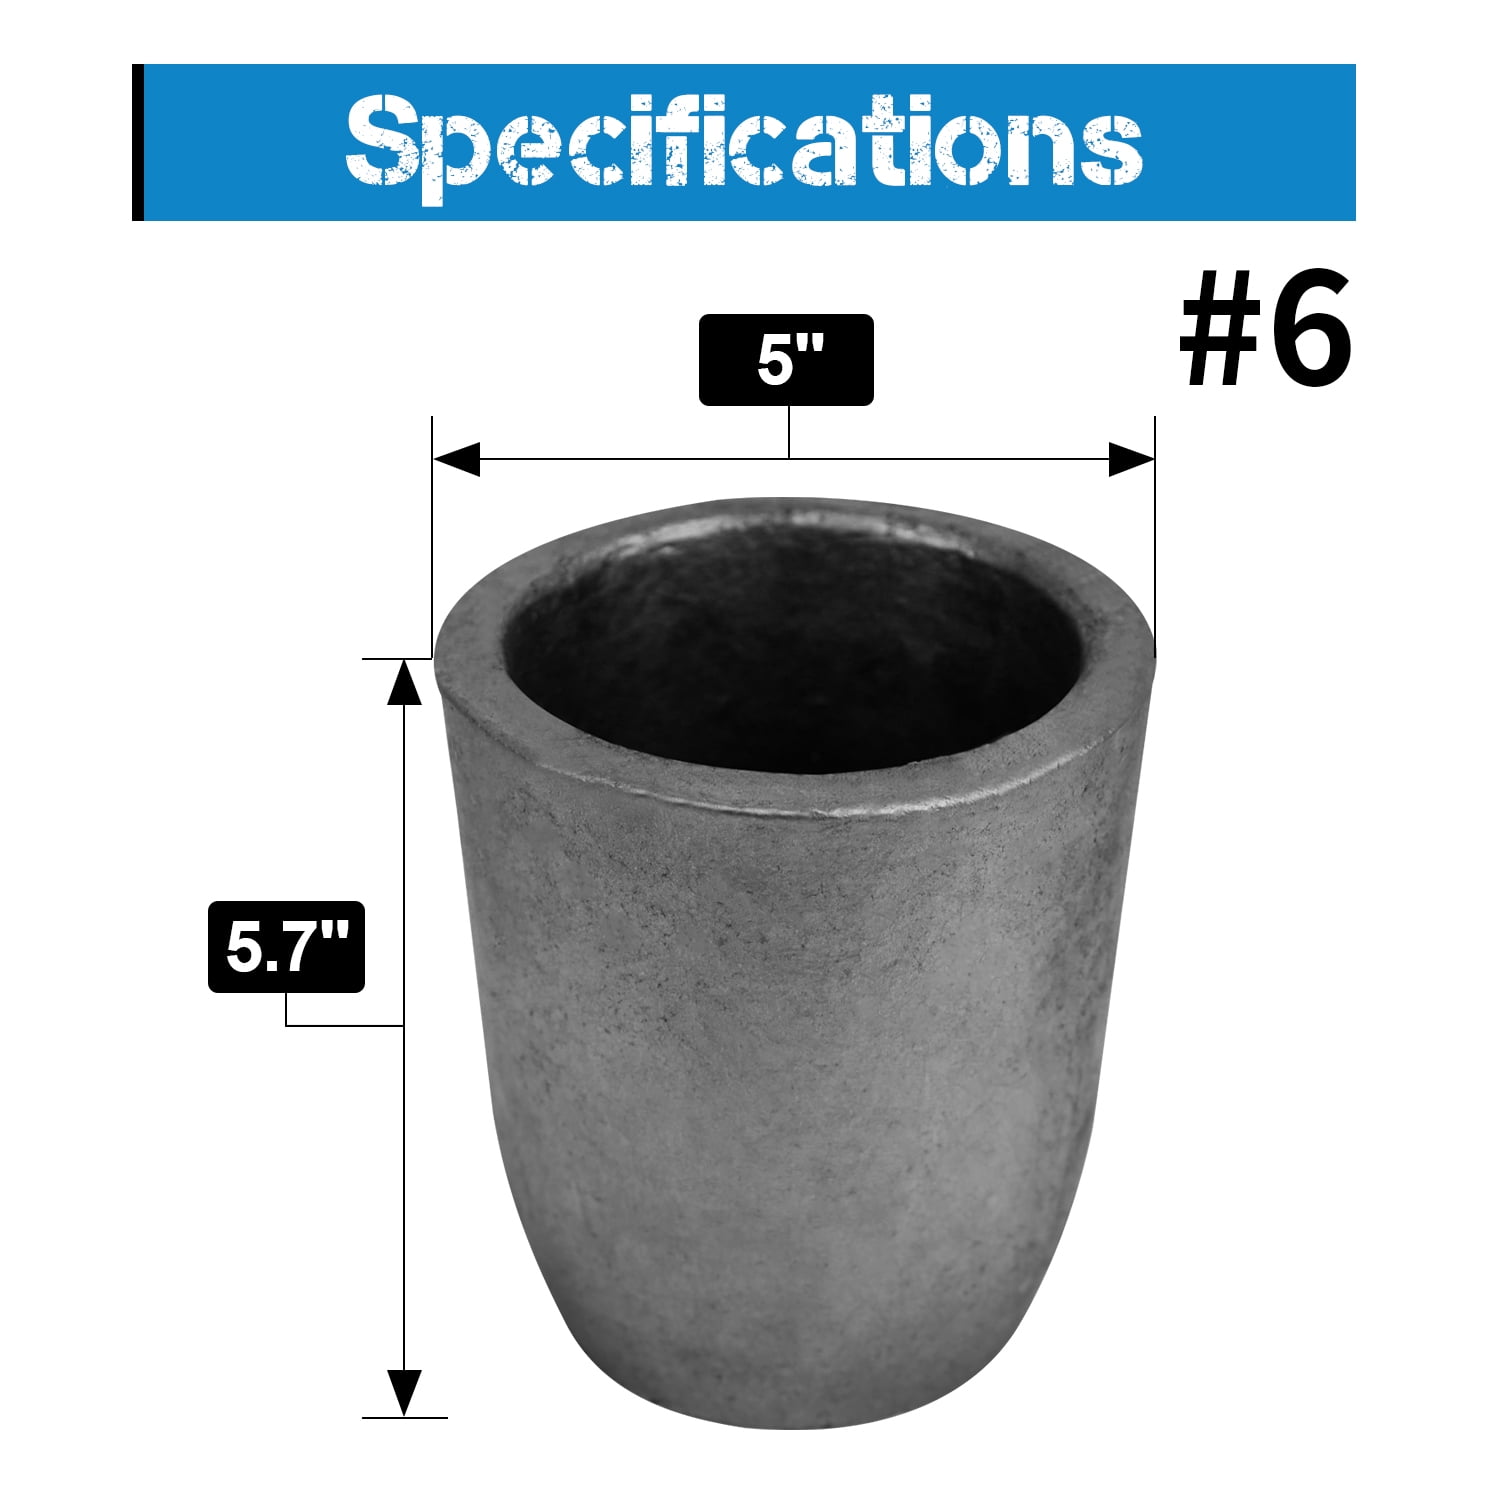 6Oz Graphite Crucible Cup Furnace Refining Melting Gold Silver Tools  58x21mm From Baixiangguo, $34.83